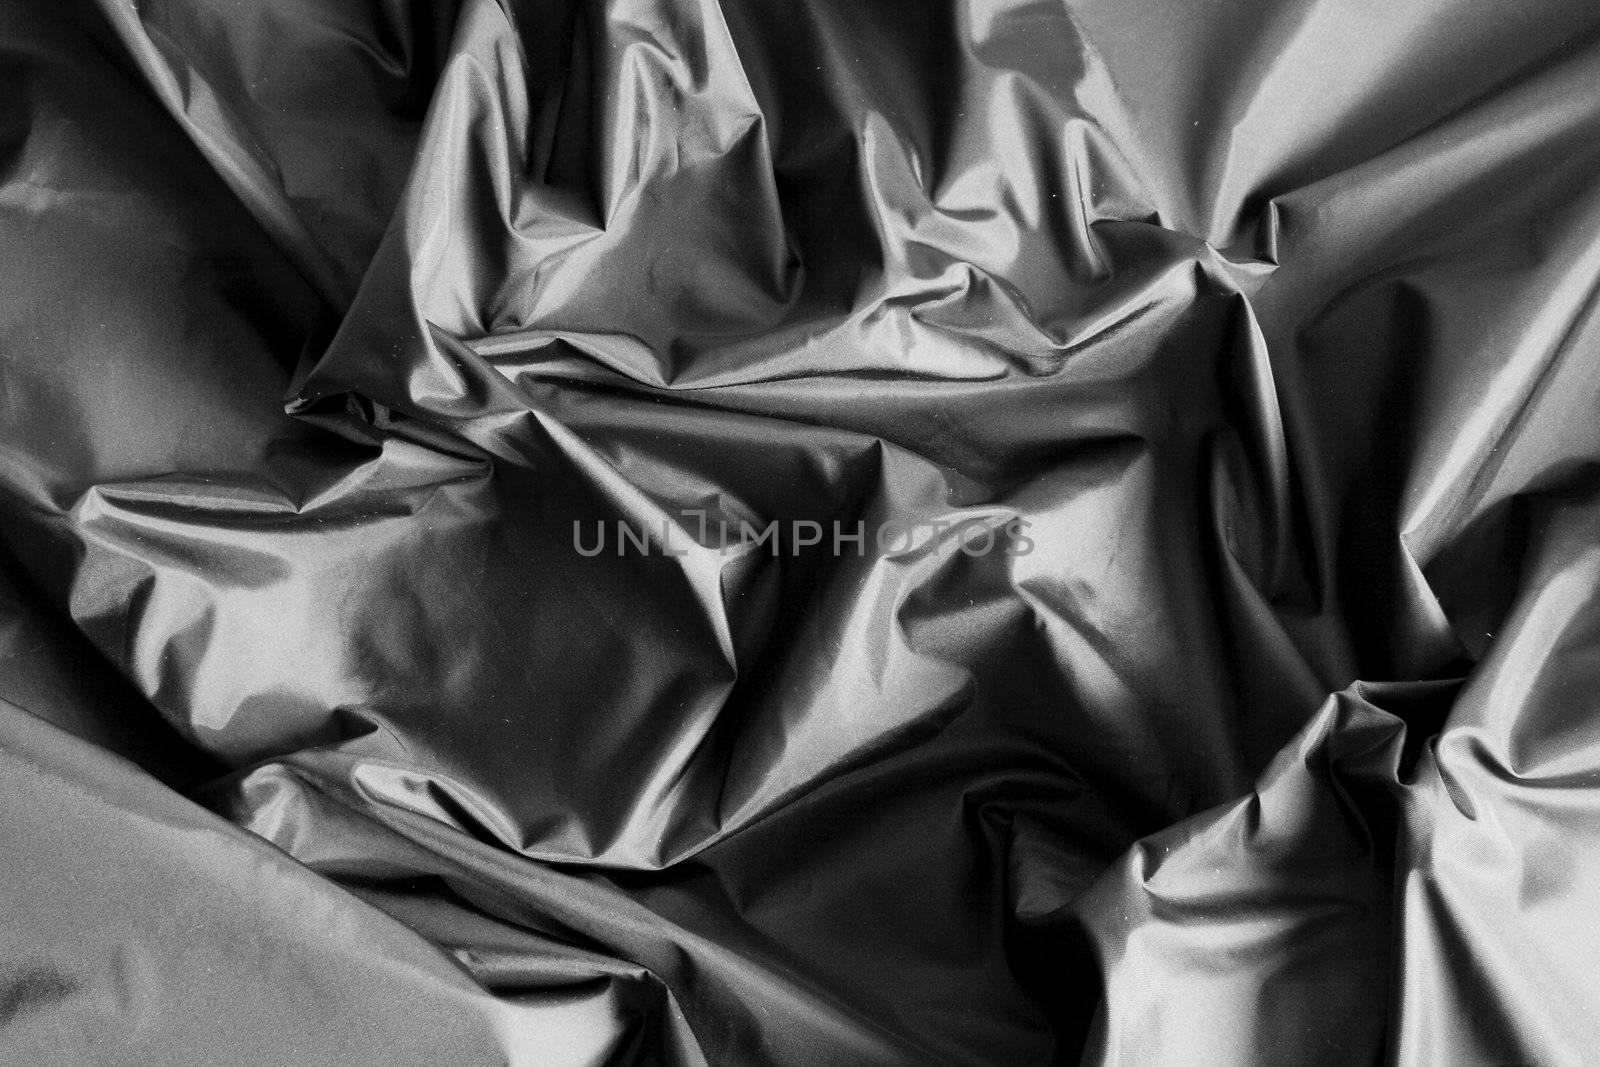 image of a black fabric with a lot of wrinkles